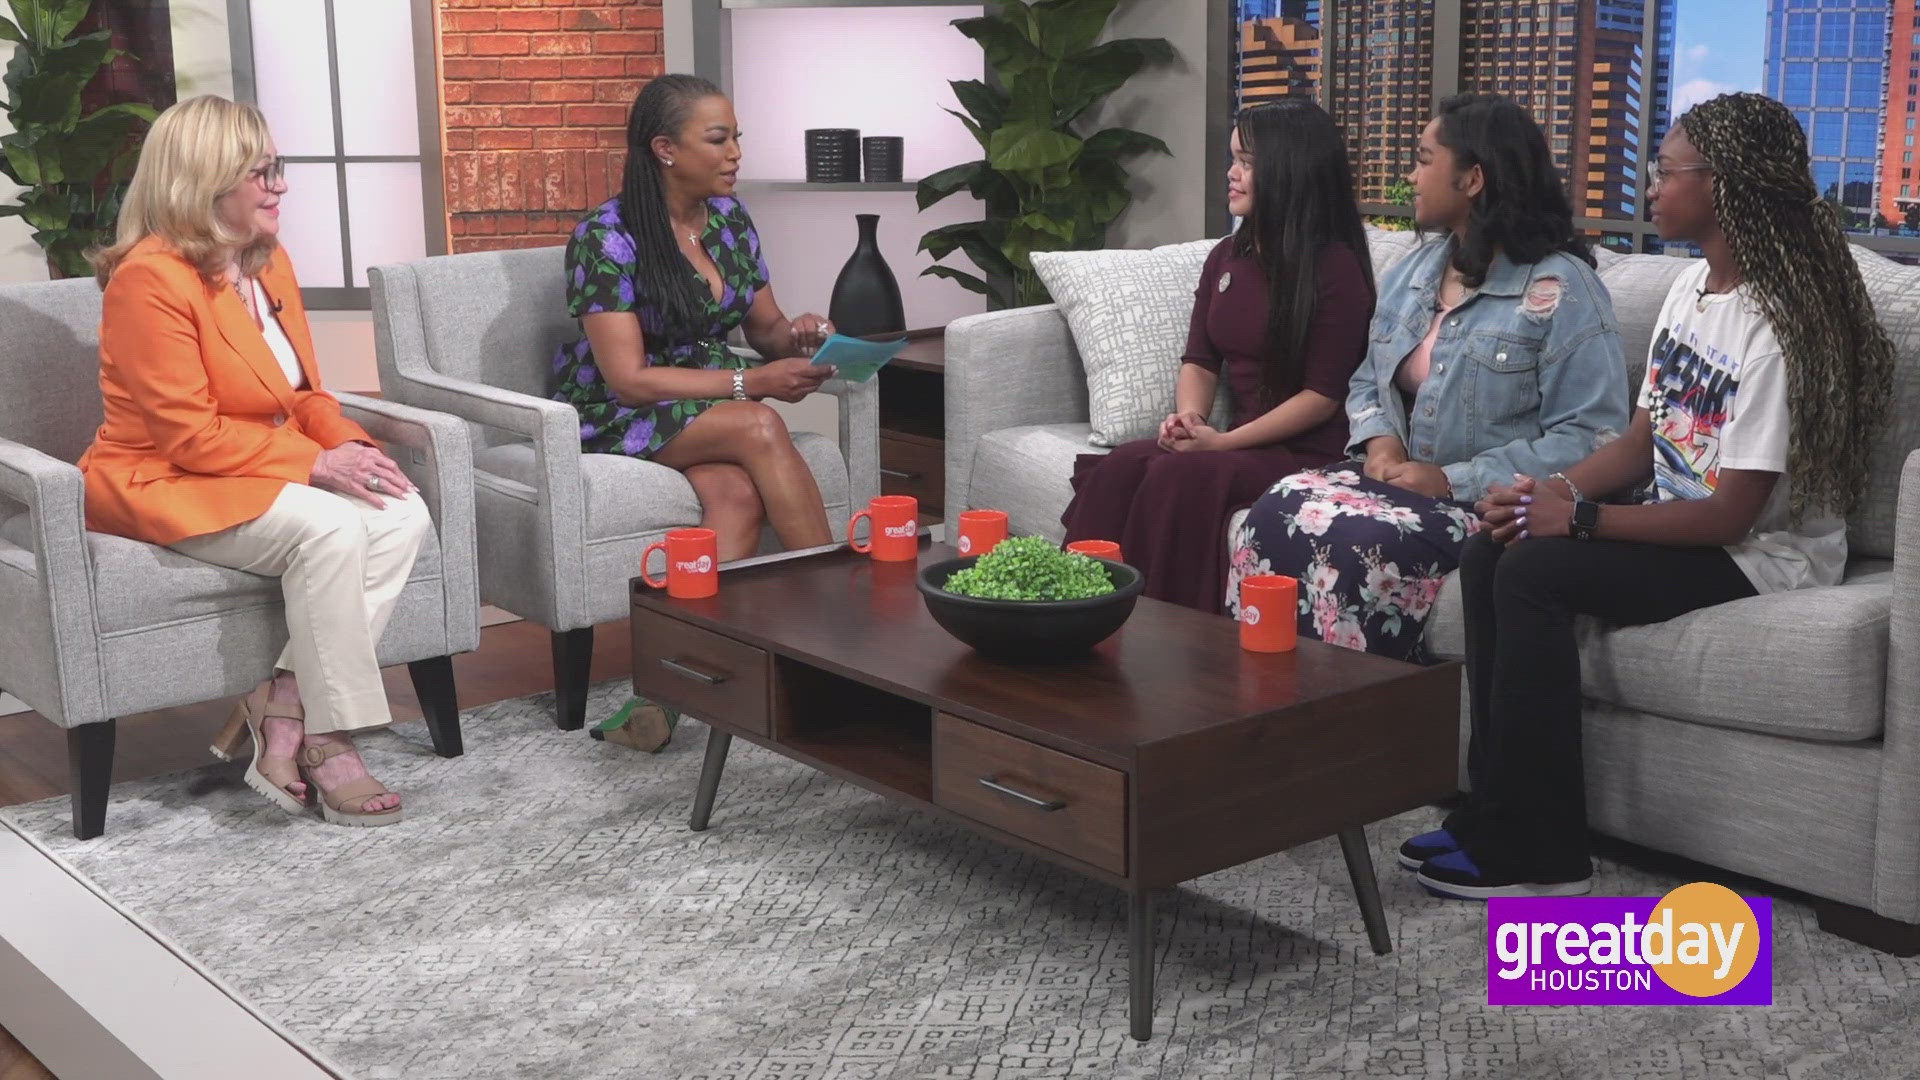 We chat with the woman behind the mission and three superstar scholarship winners from the Youth of the Year Scholarship Program.